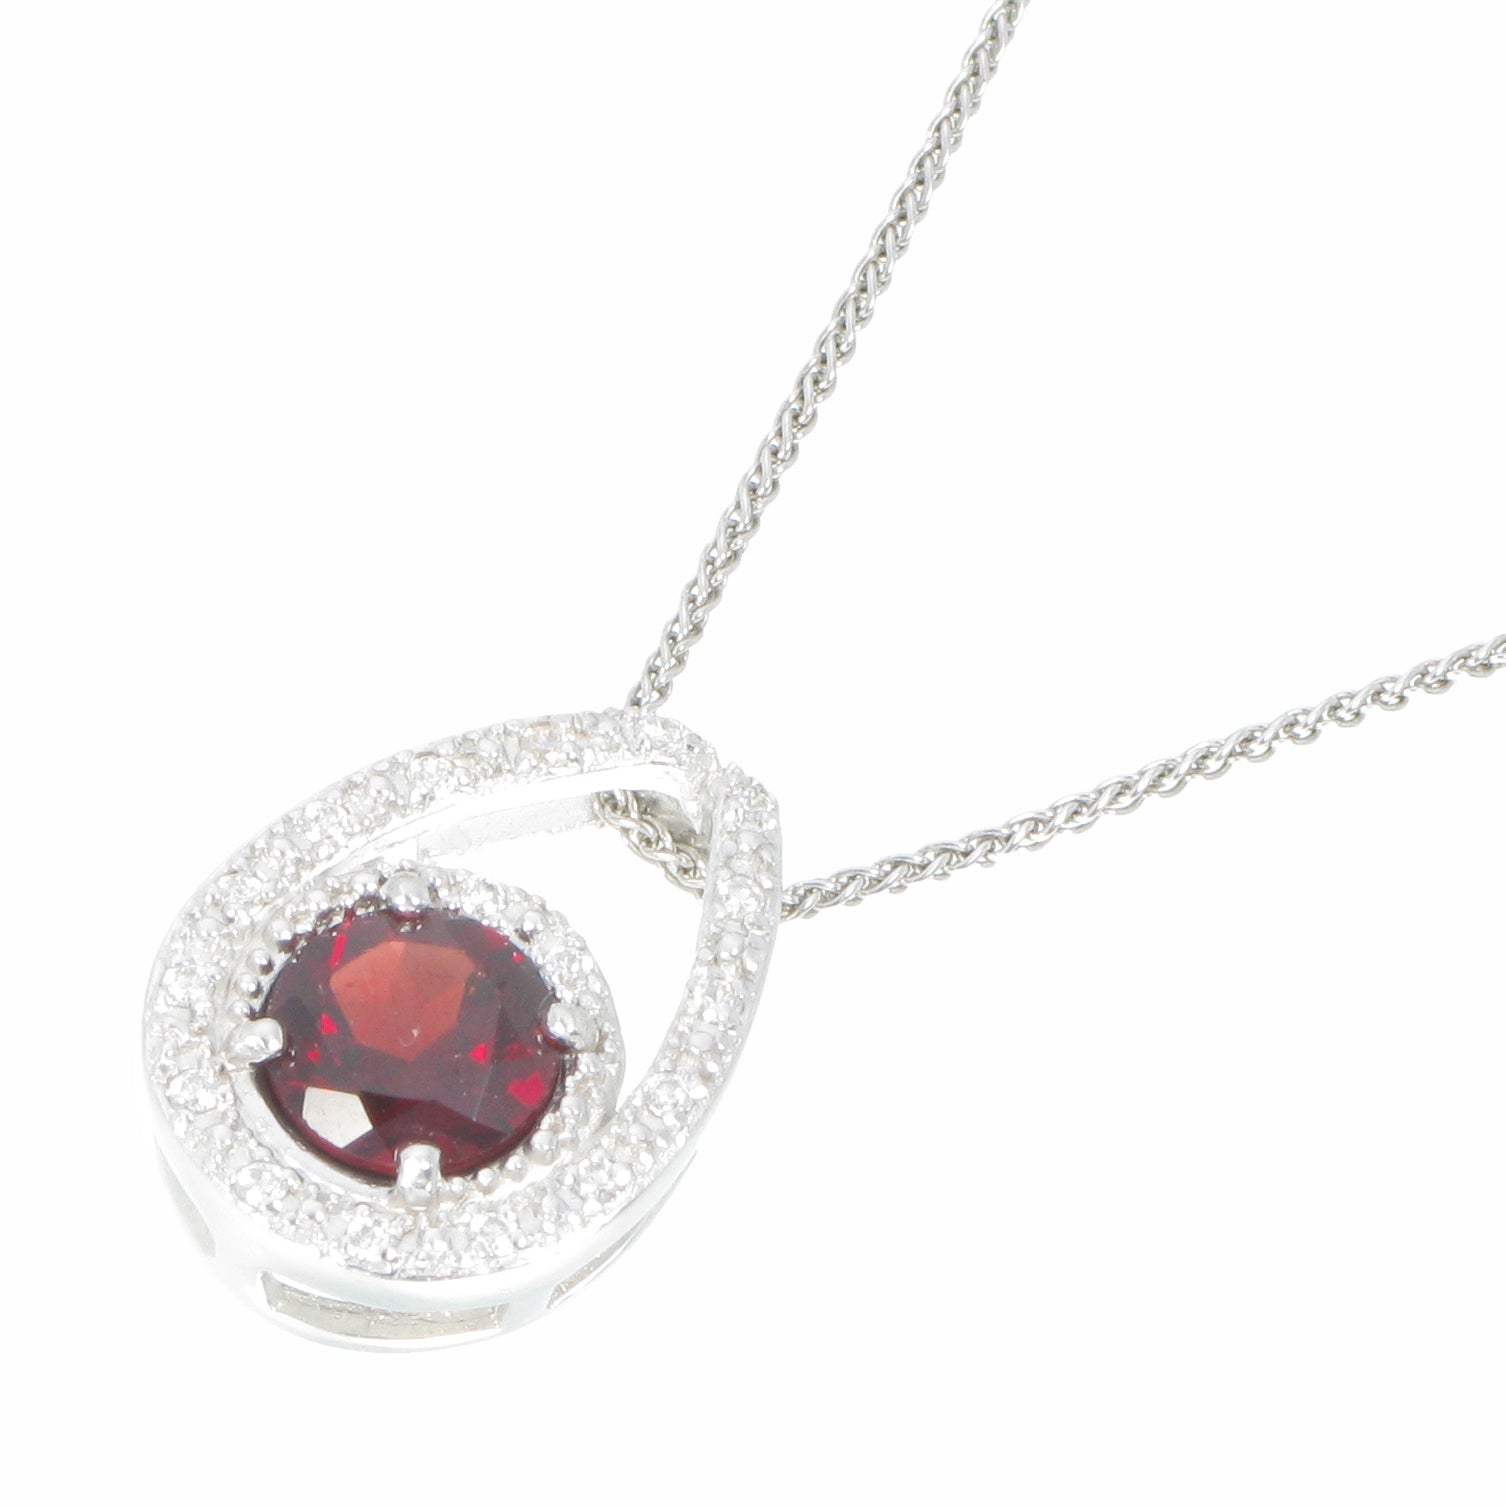 1.05 cttw Pendant Necklace, Garnet Pendant Necklace for Women in .925 Sterling Silver with Rhodium, 18 Inch Chain, Prong Setting